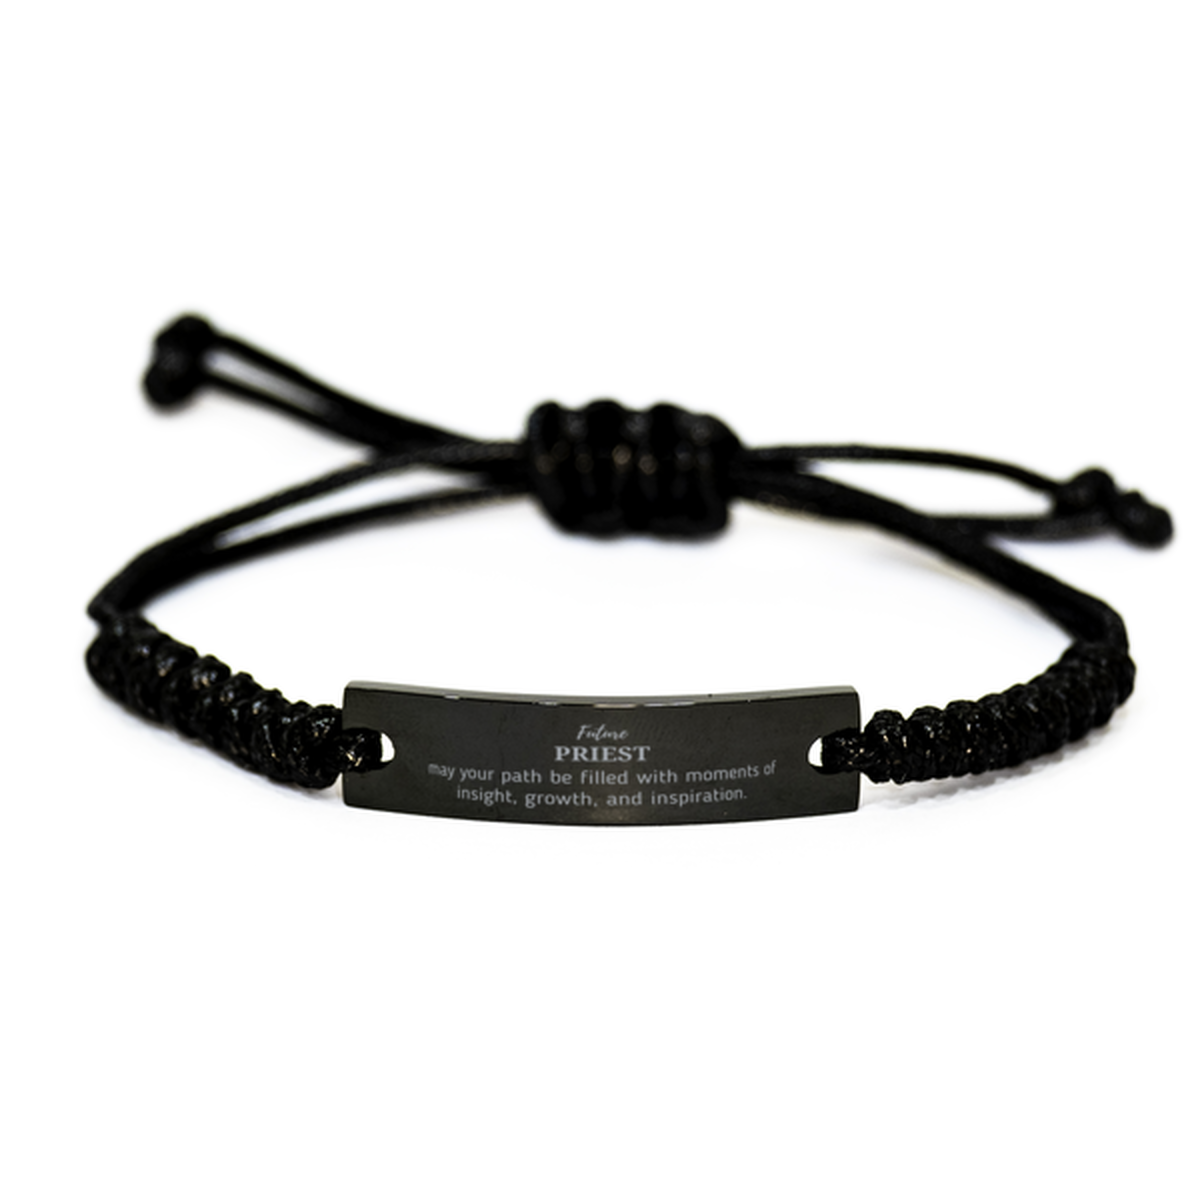 Future Priest Gifts, May your path be filled with moments of insight, Graduation Gifts for New Priest, Christmas Unique Black Rope Bracelet For Men, Women, Friends